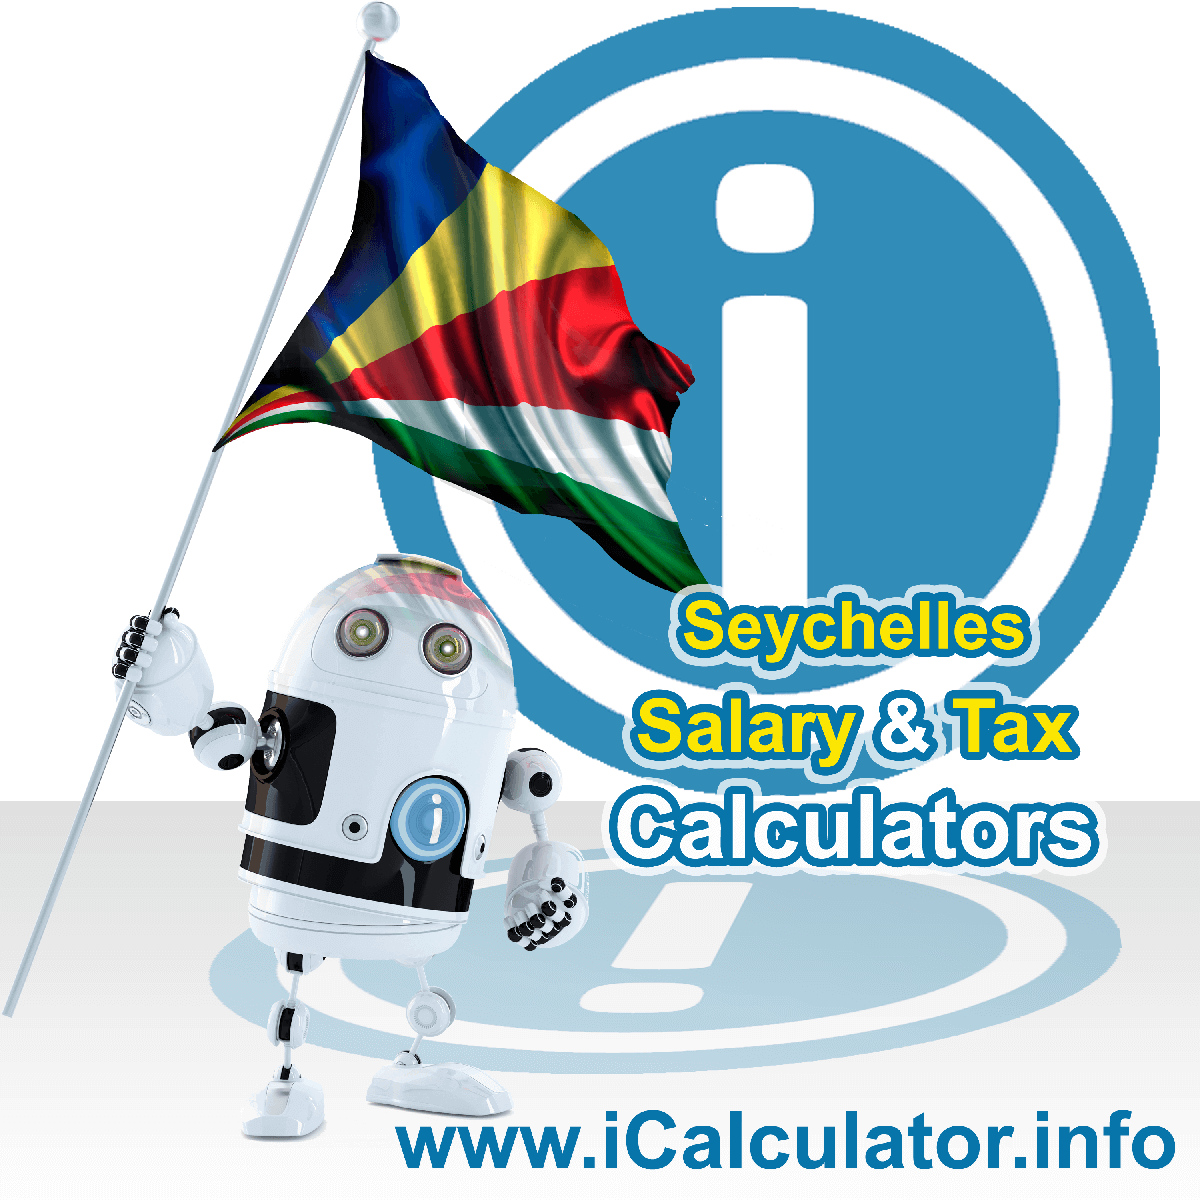 Seychelles Salary Calculator. This image shows the Seychellesese flag and information relating to the tax formula for the Seychelles Tax Calculator